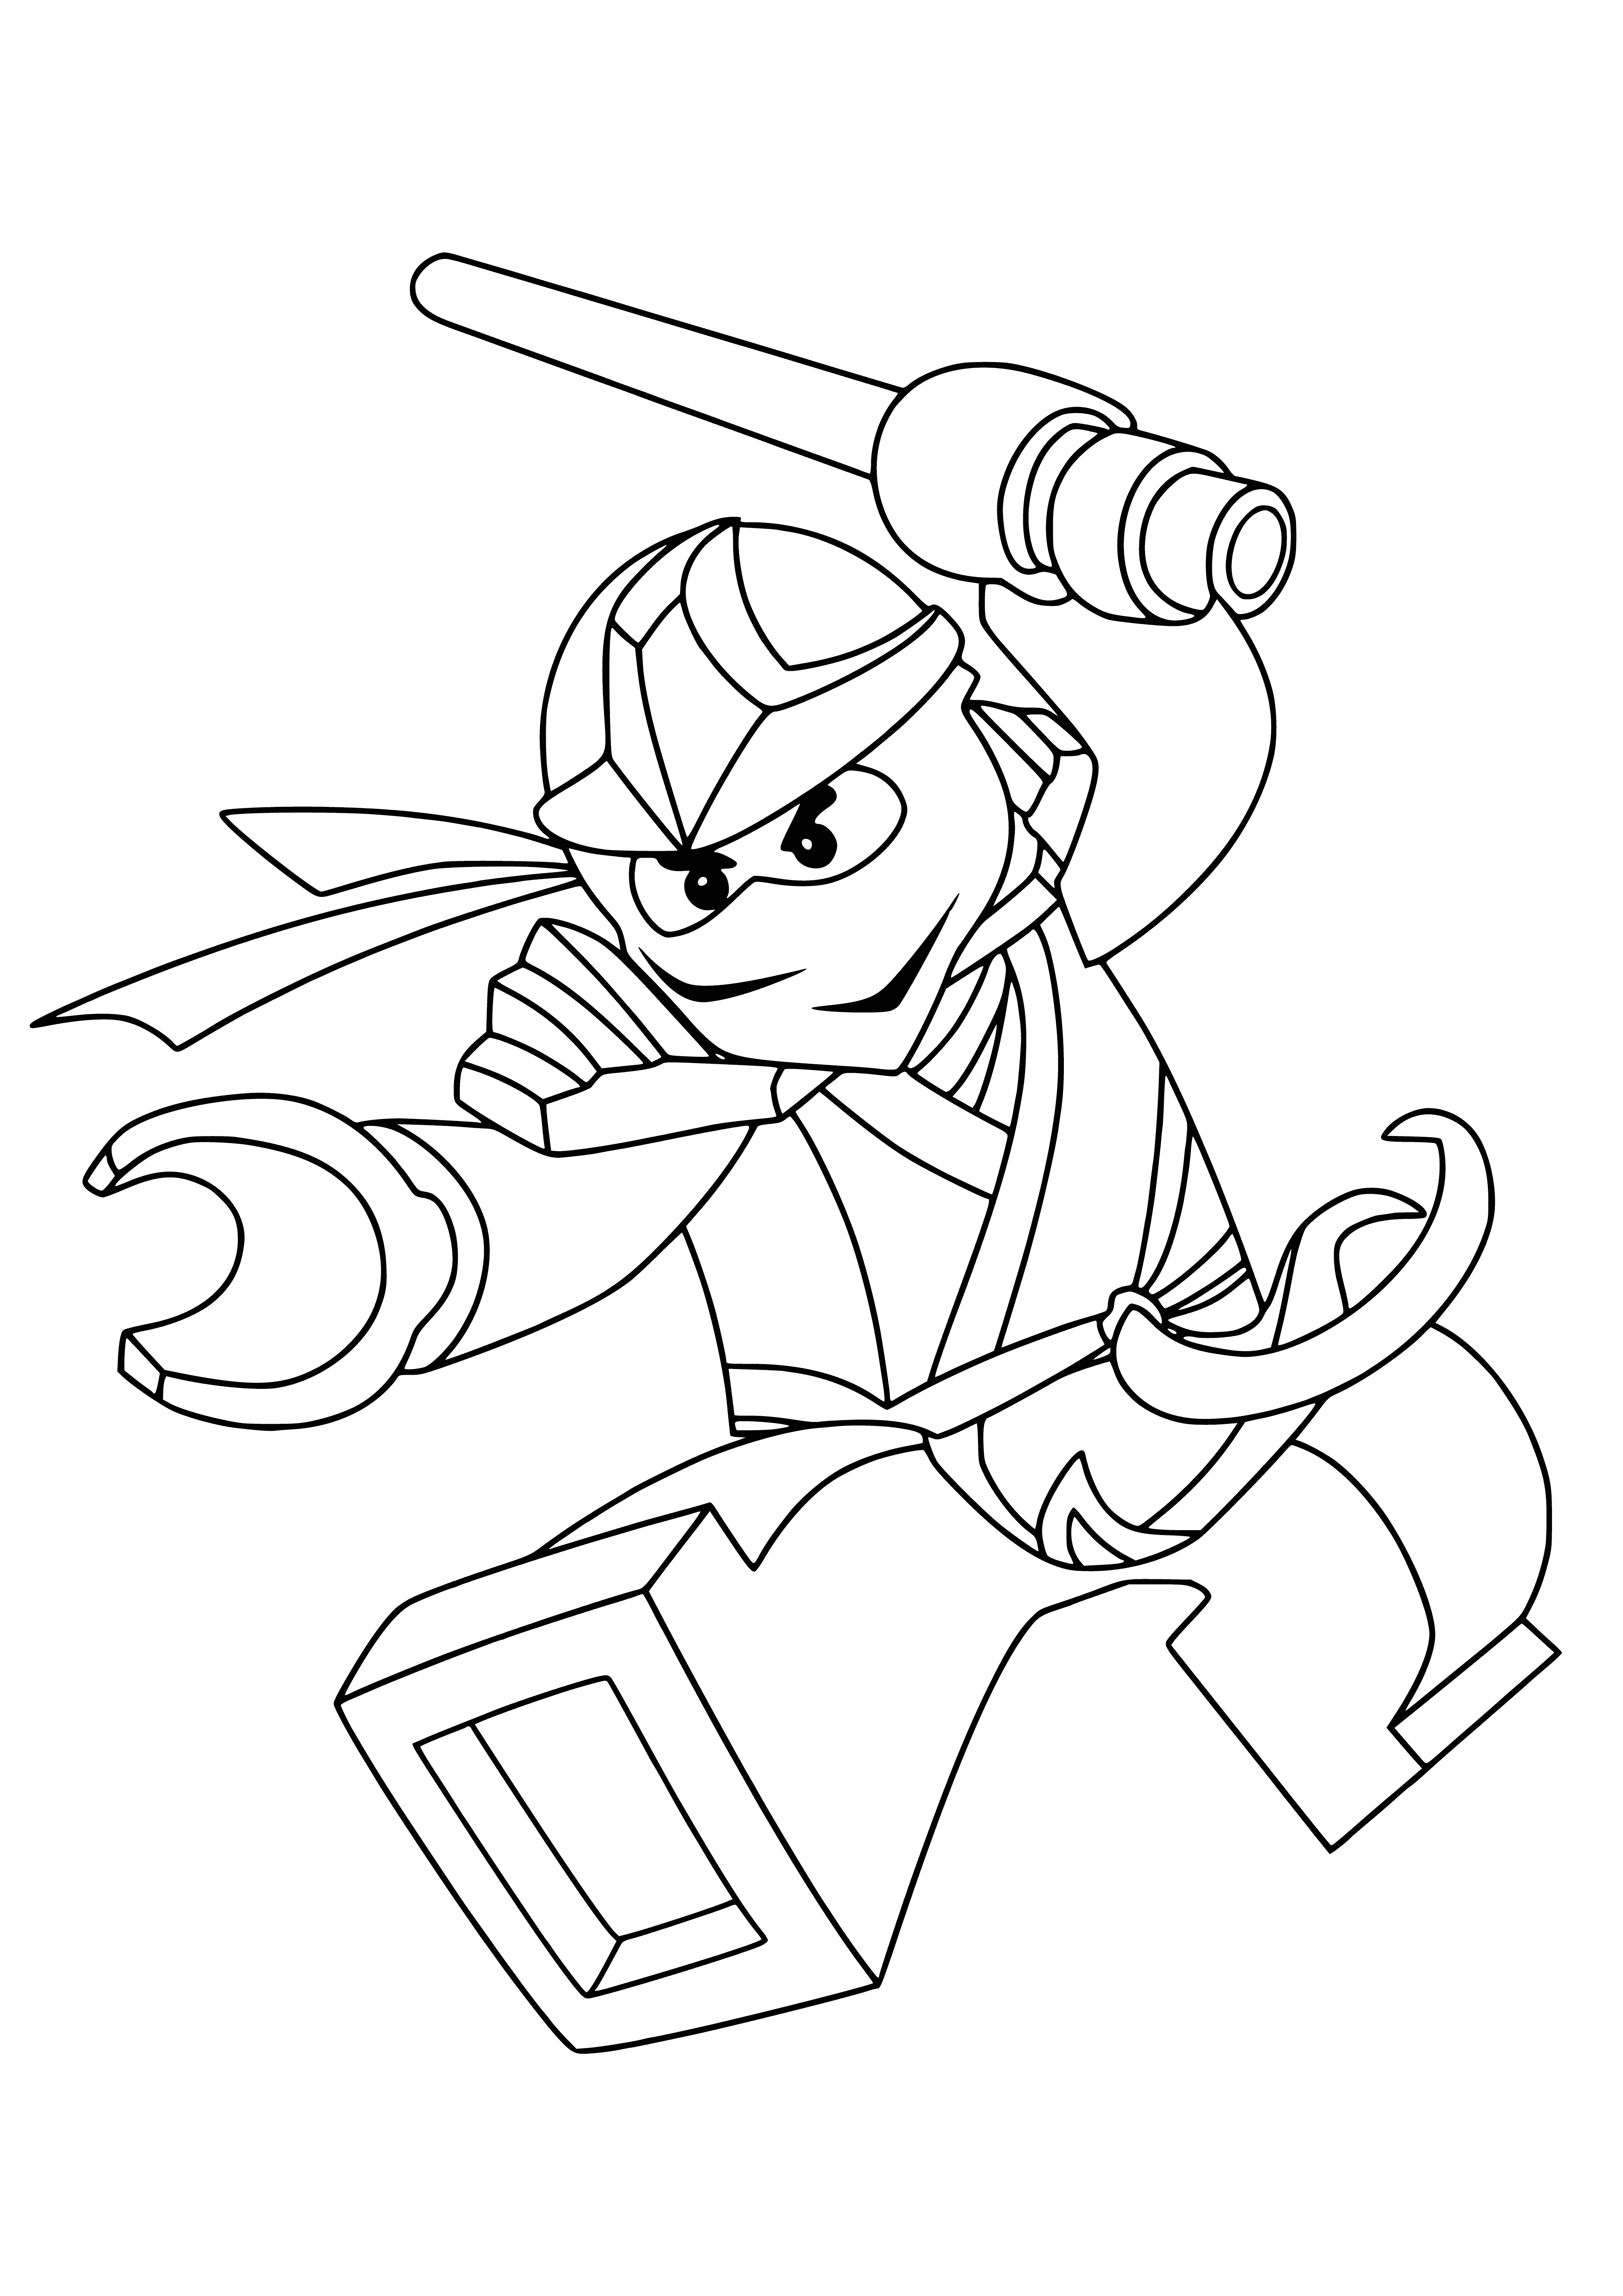 coloring page: Four LEGO ninjas in different fighting stances holding katanas, nunchucks & staff in front of a temple, trees, bushes and waterfall.